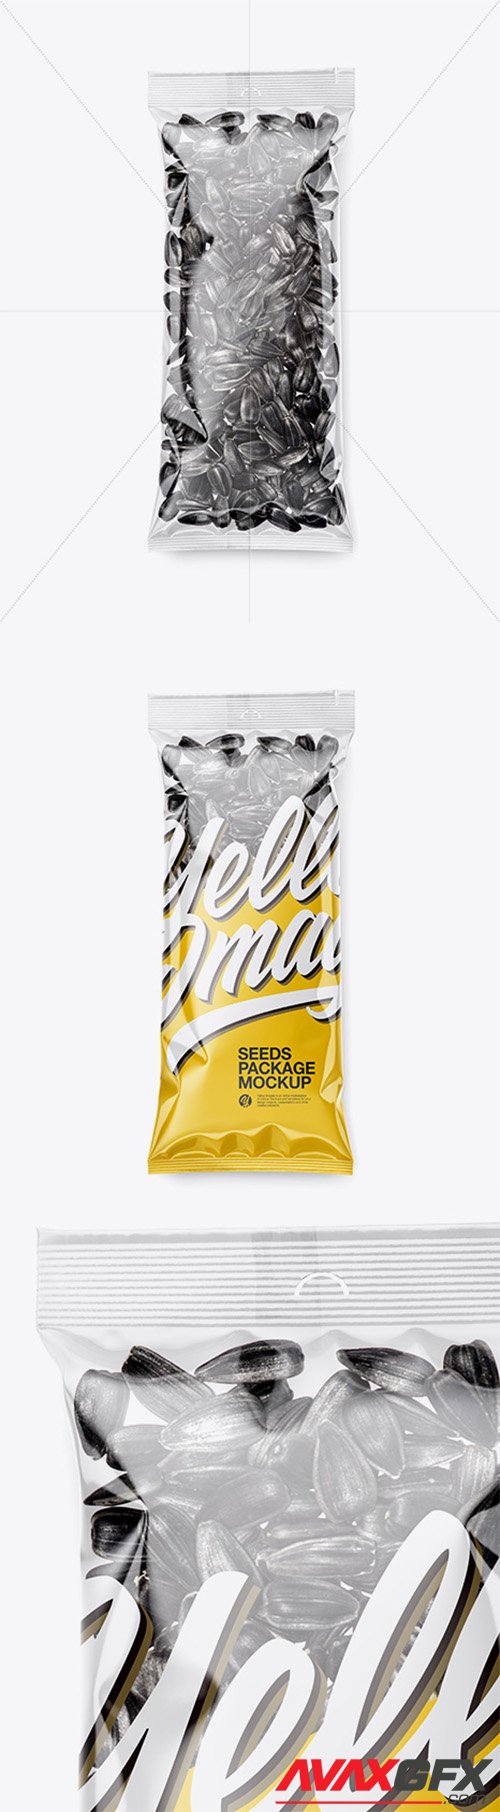 Clear Plastic Pack w/ Sunflower Seeds Mockup 44113